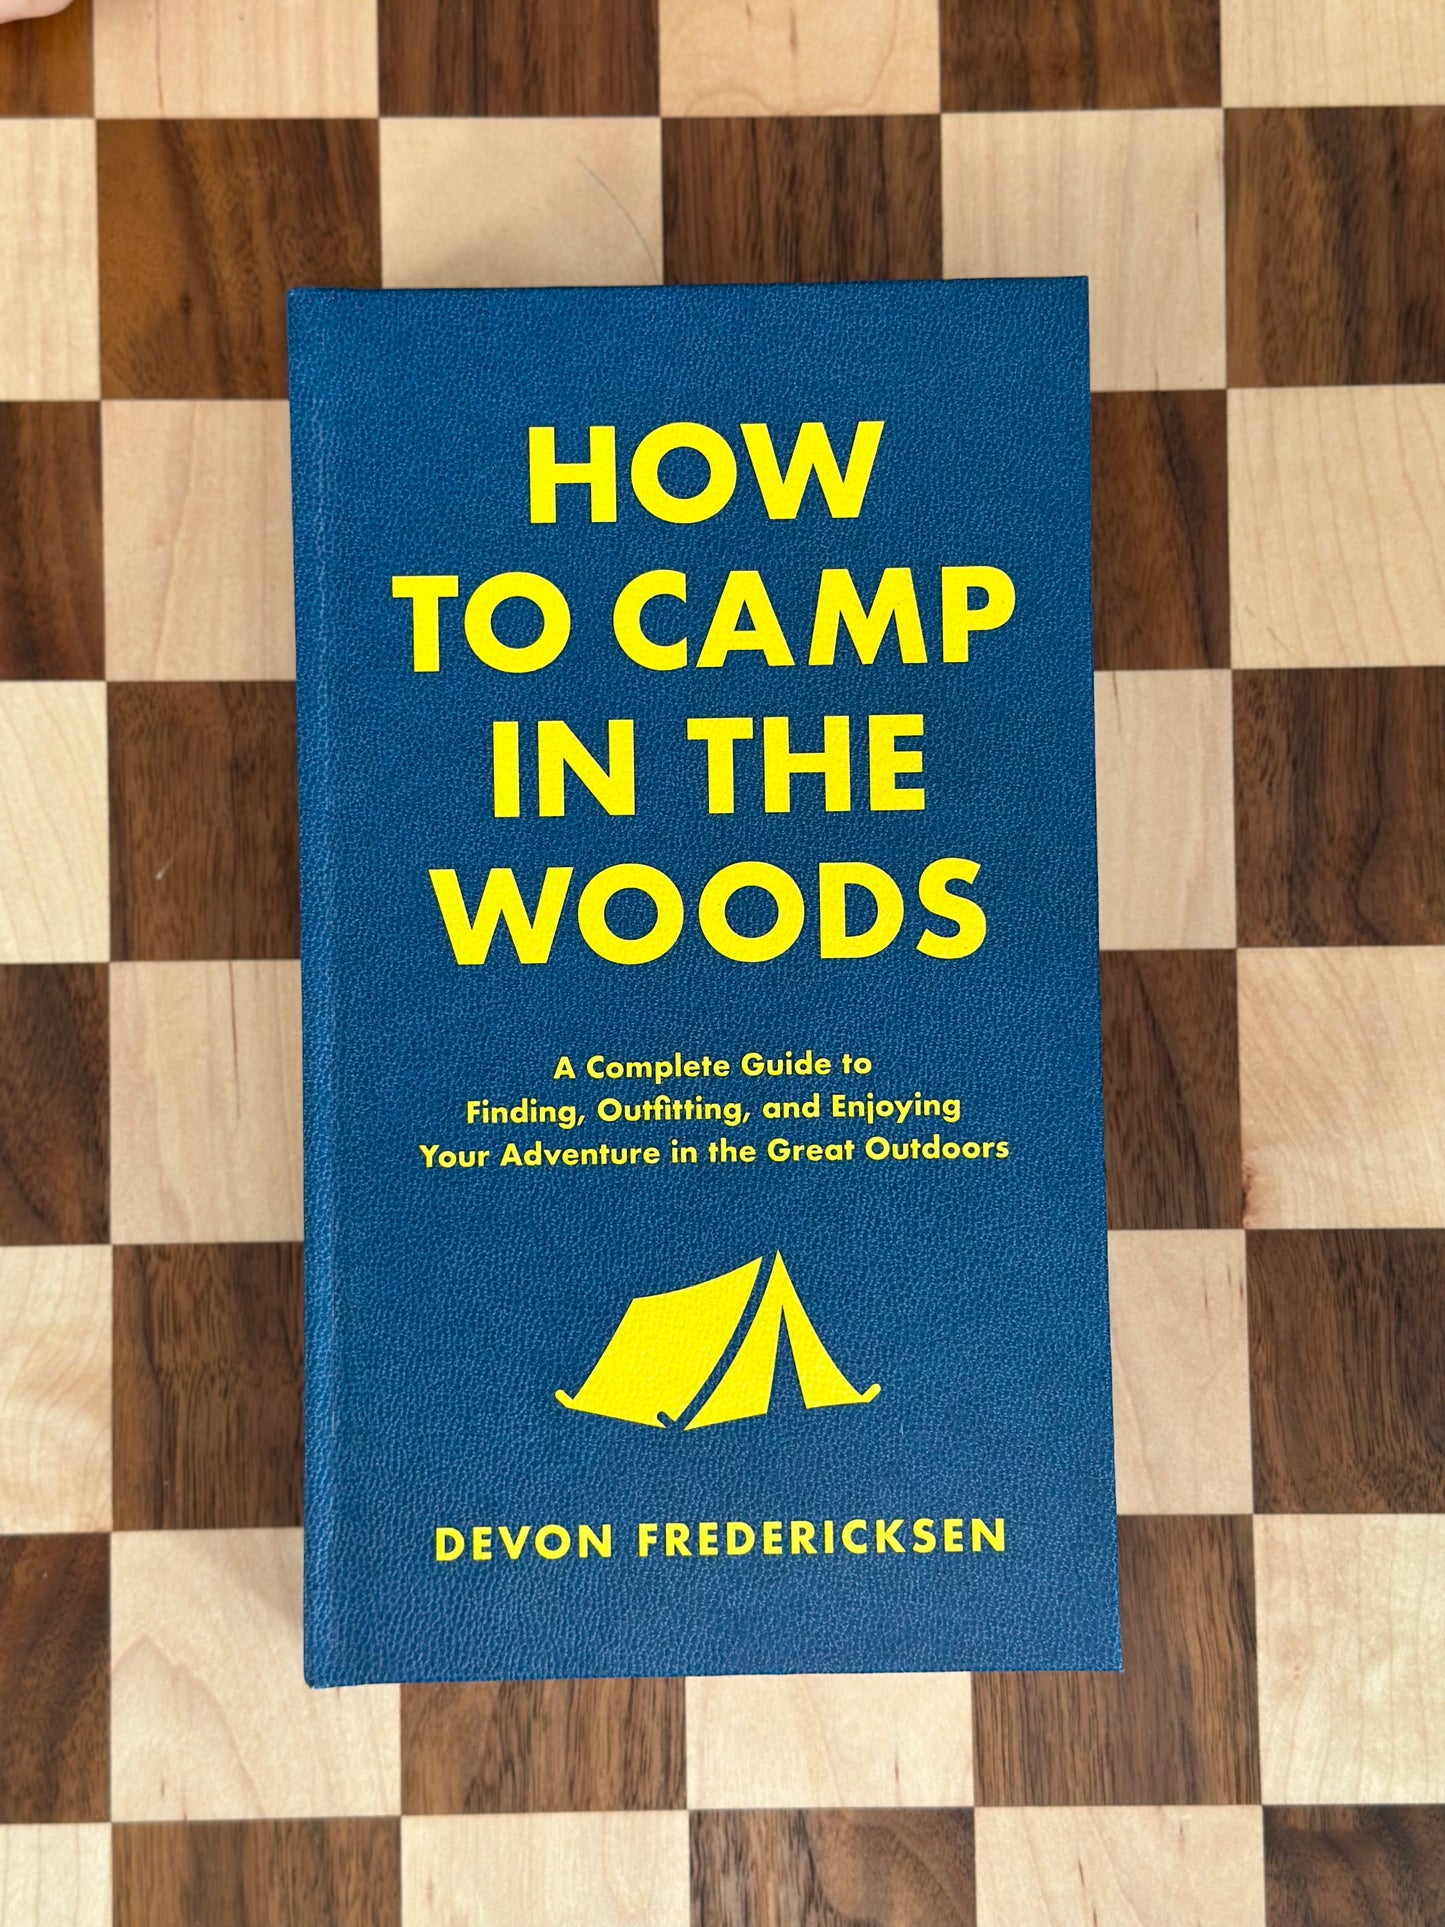 "How to Camp in the Woods", Book